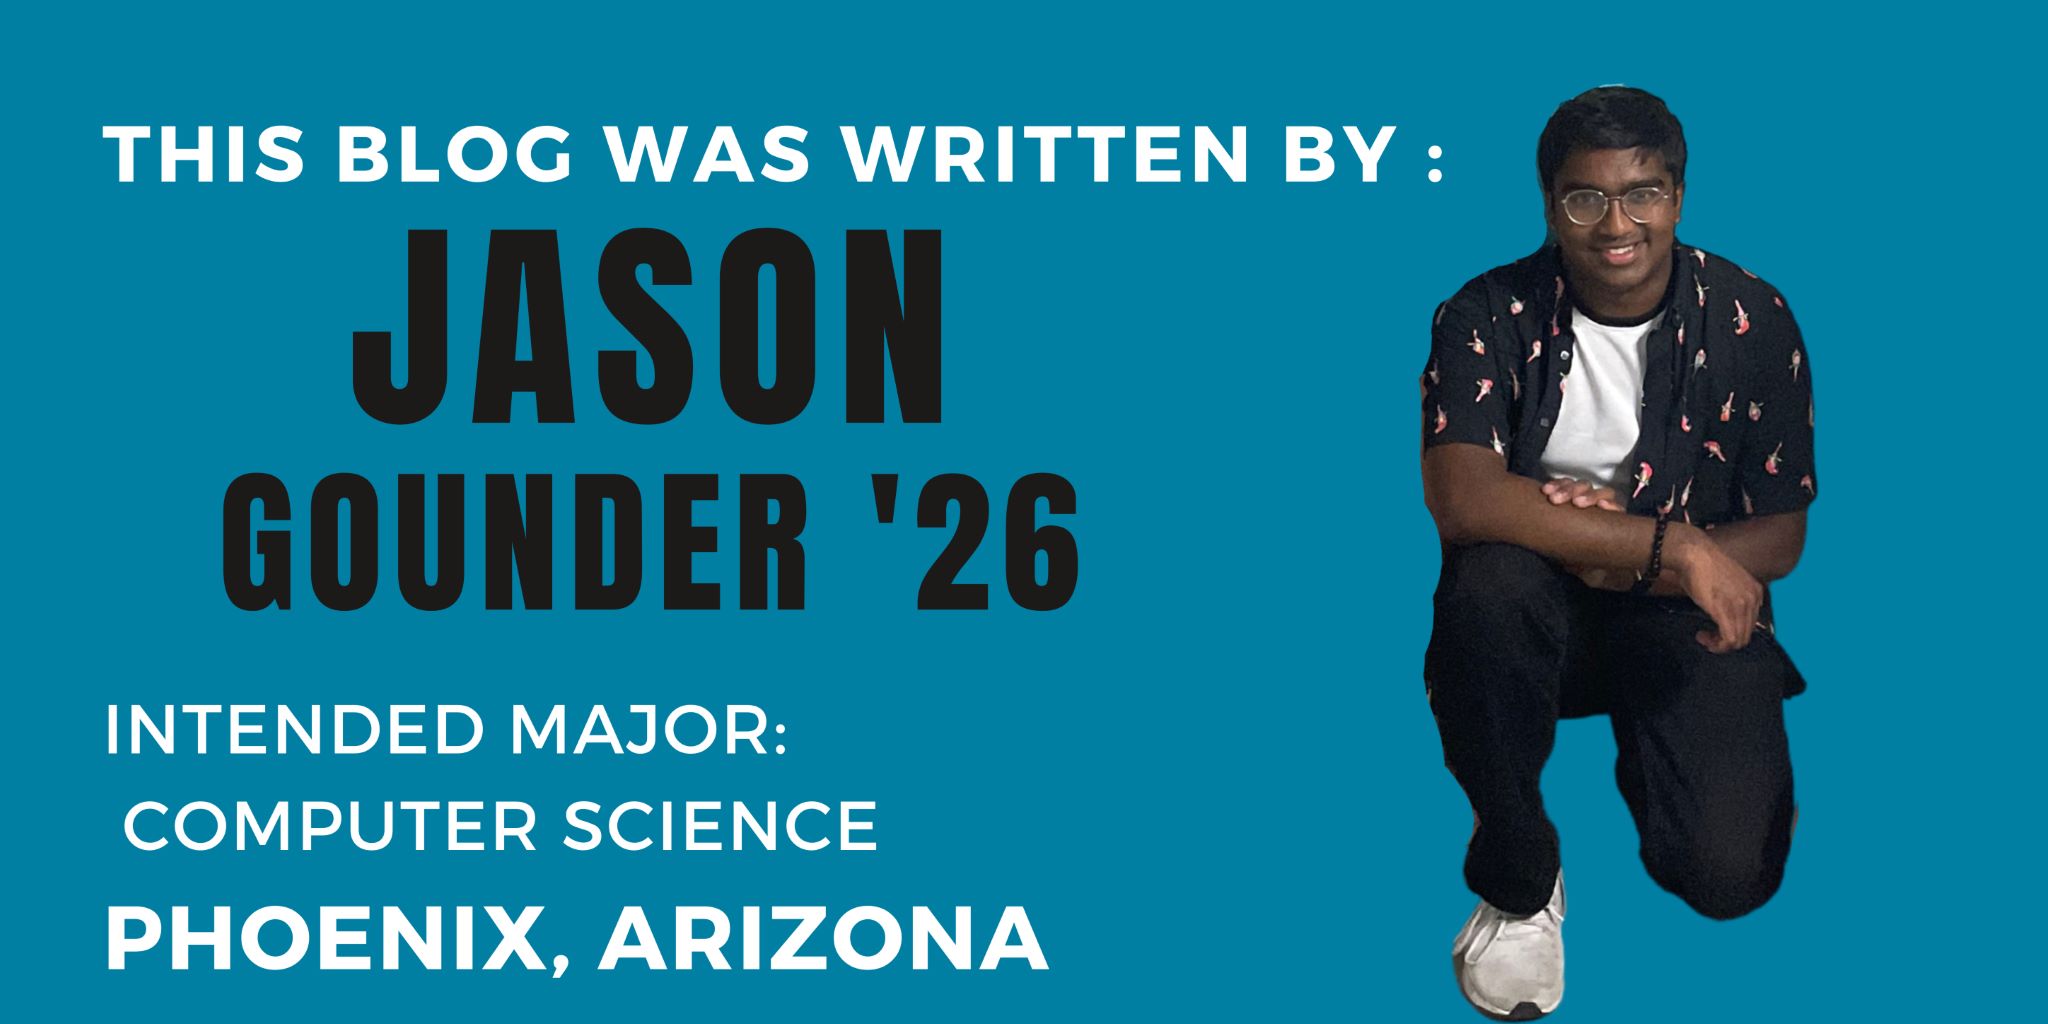 THis blog was written by Jason Gounder '26. Intended major: Computer Science. Phoenix, Arizona